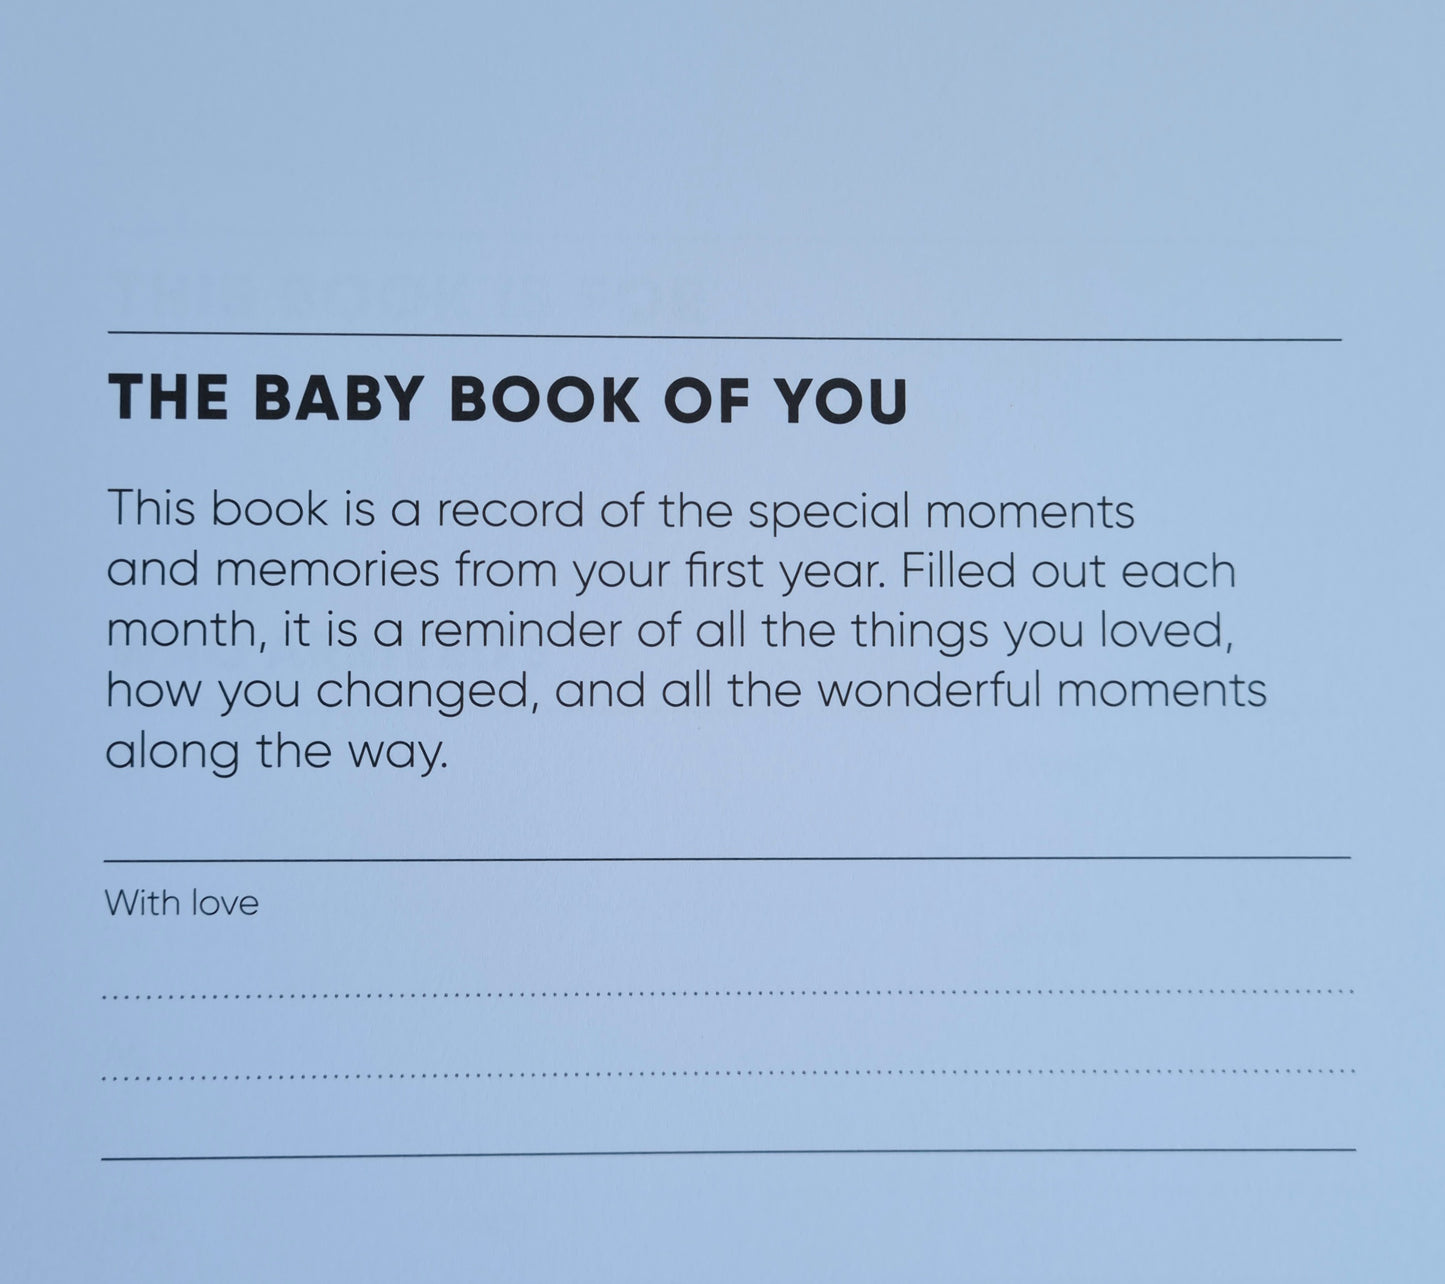 The baby book of you